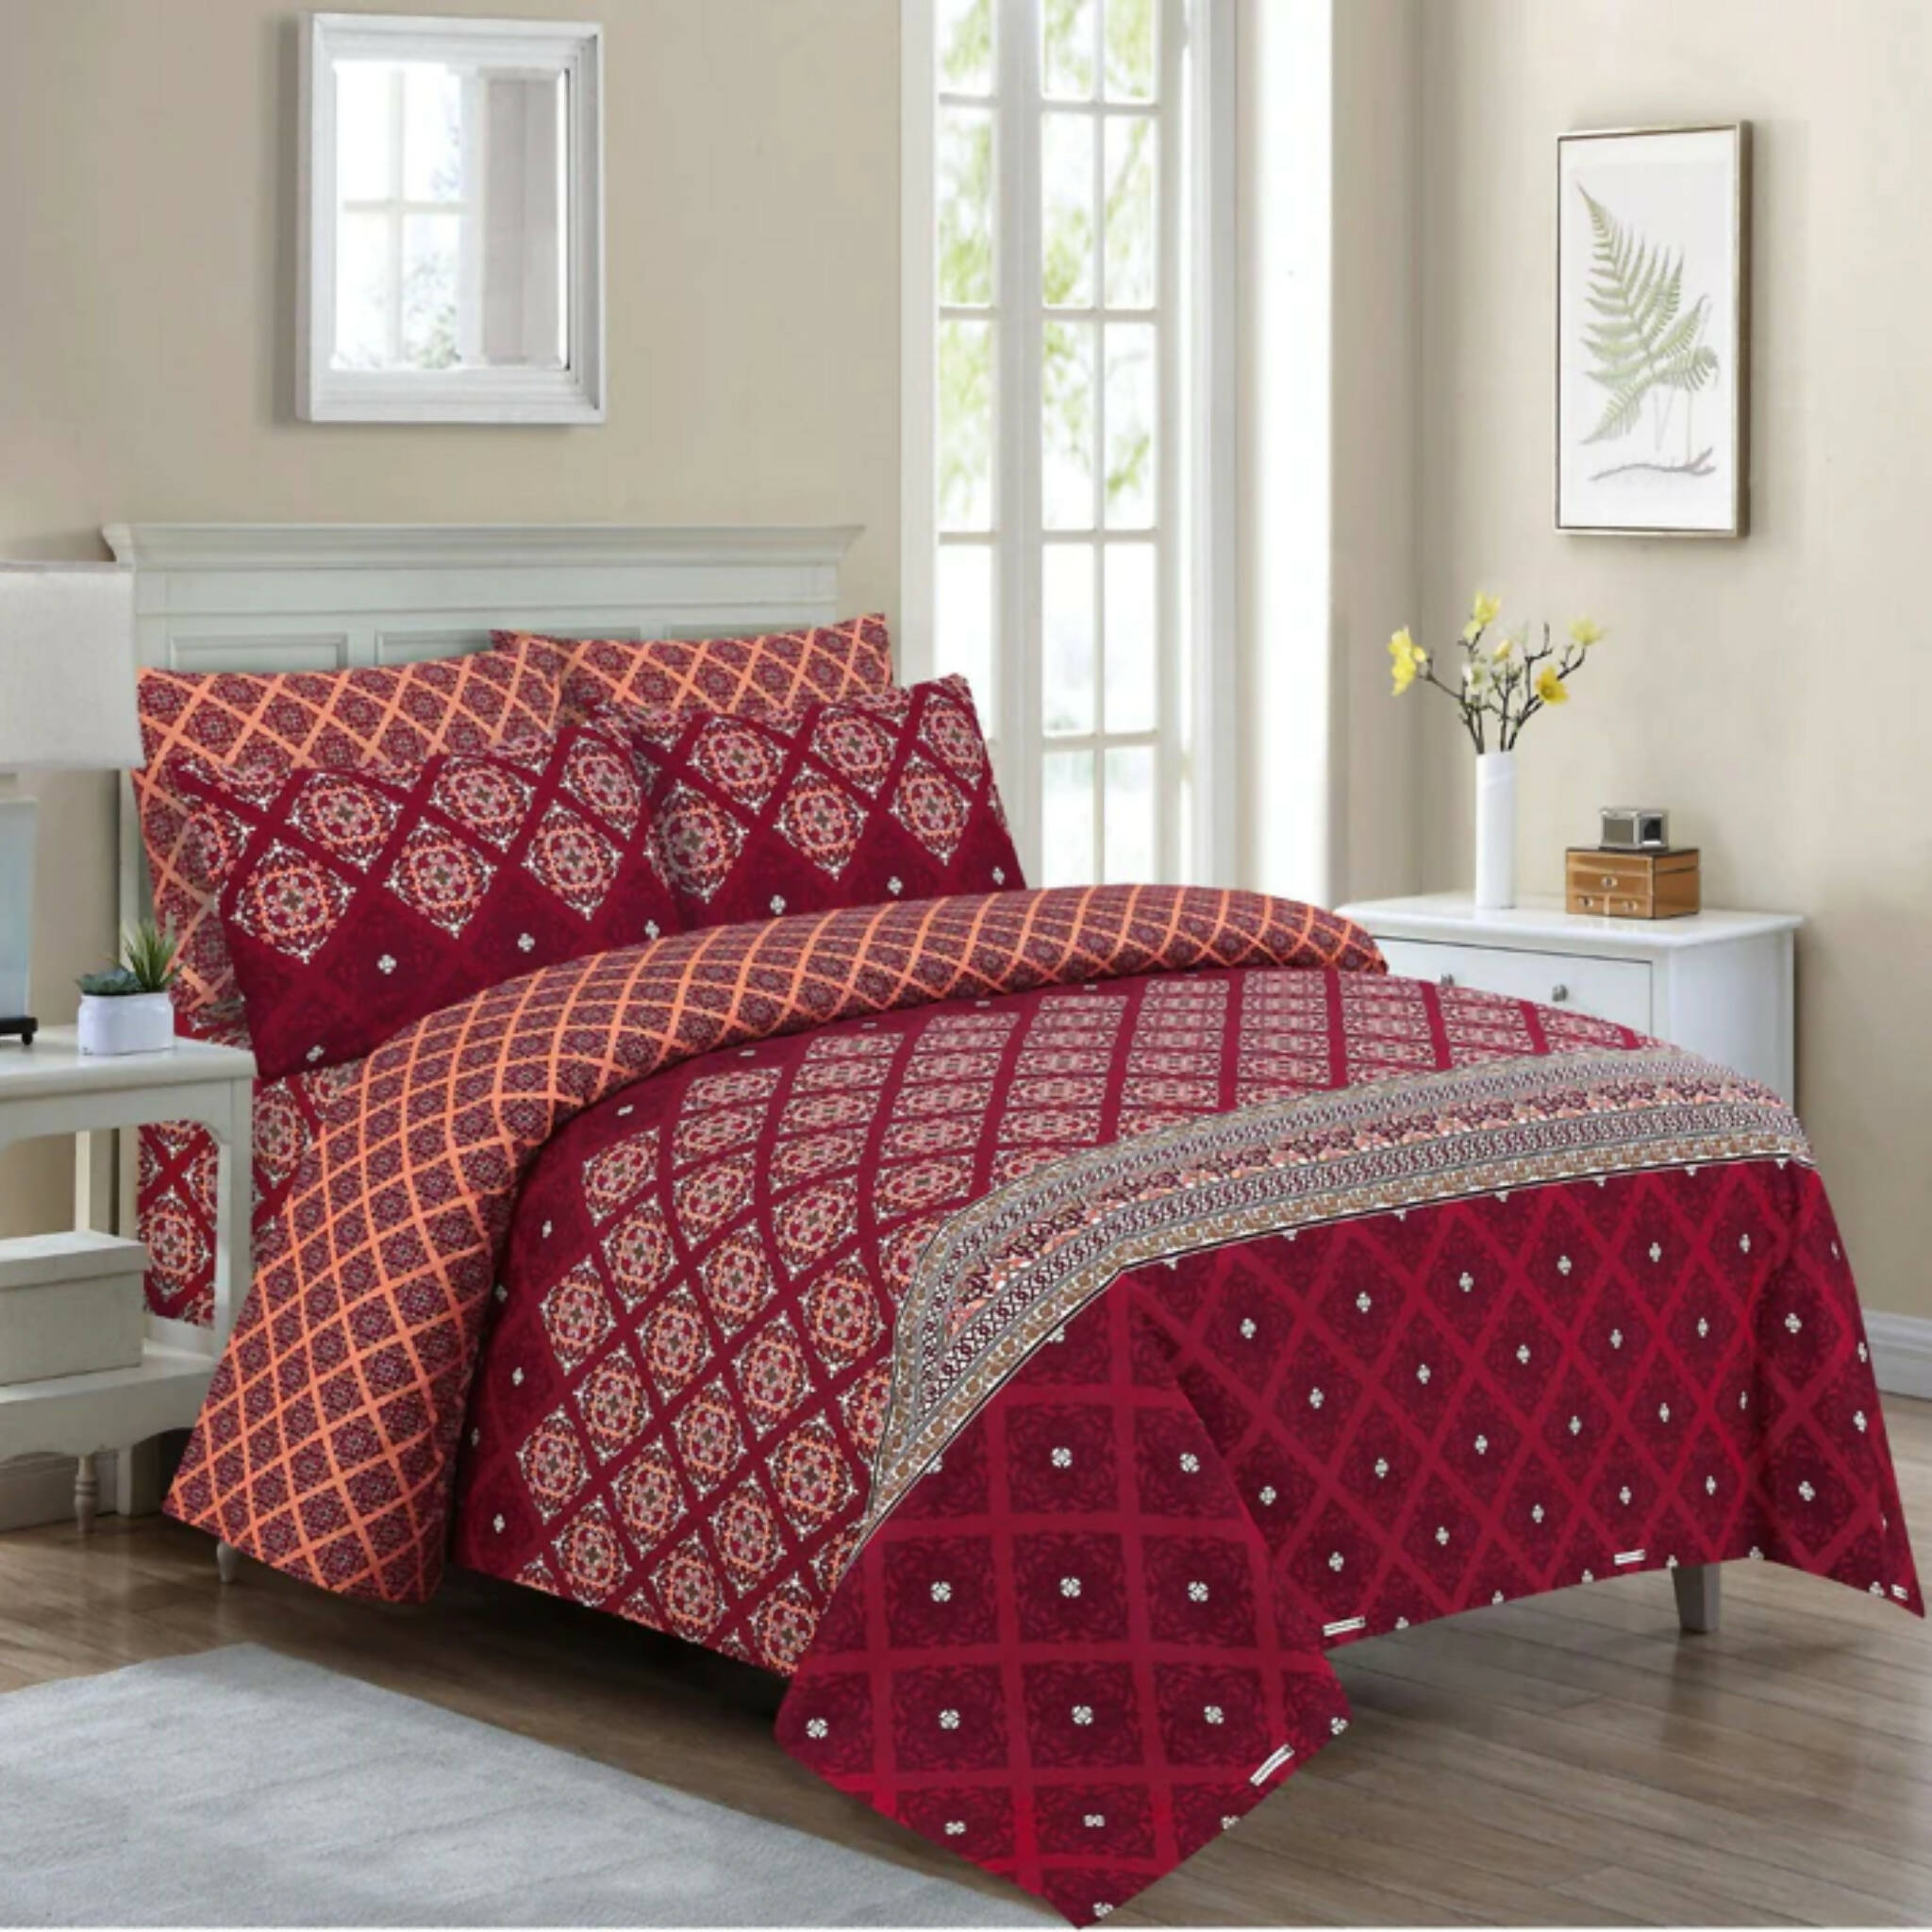 Quilt & Cover, Maroon Square Texture - Polycotton Perfection